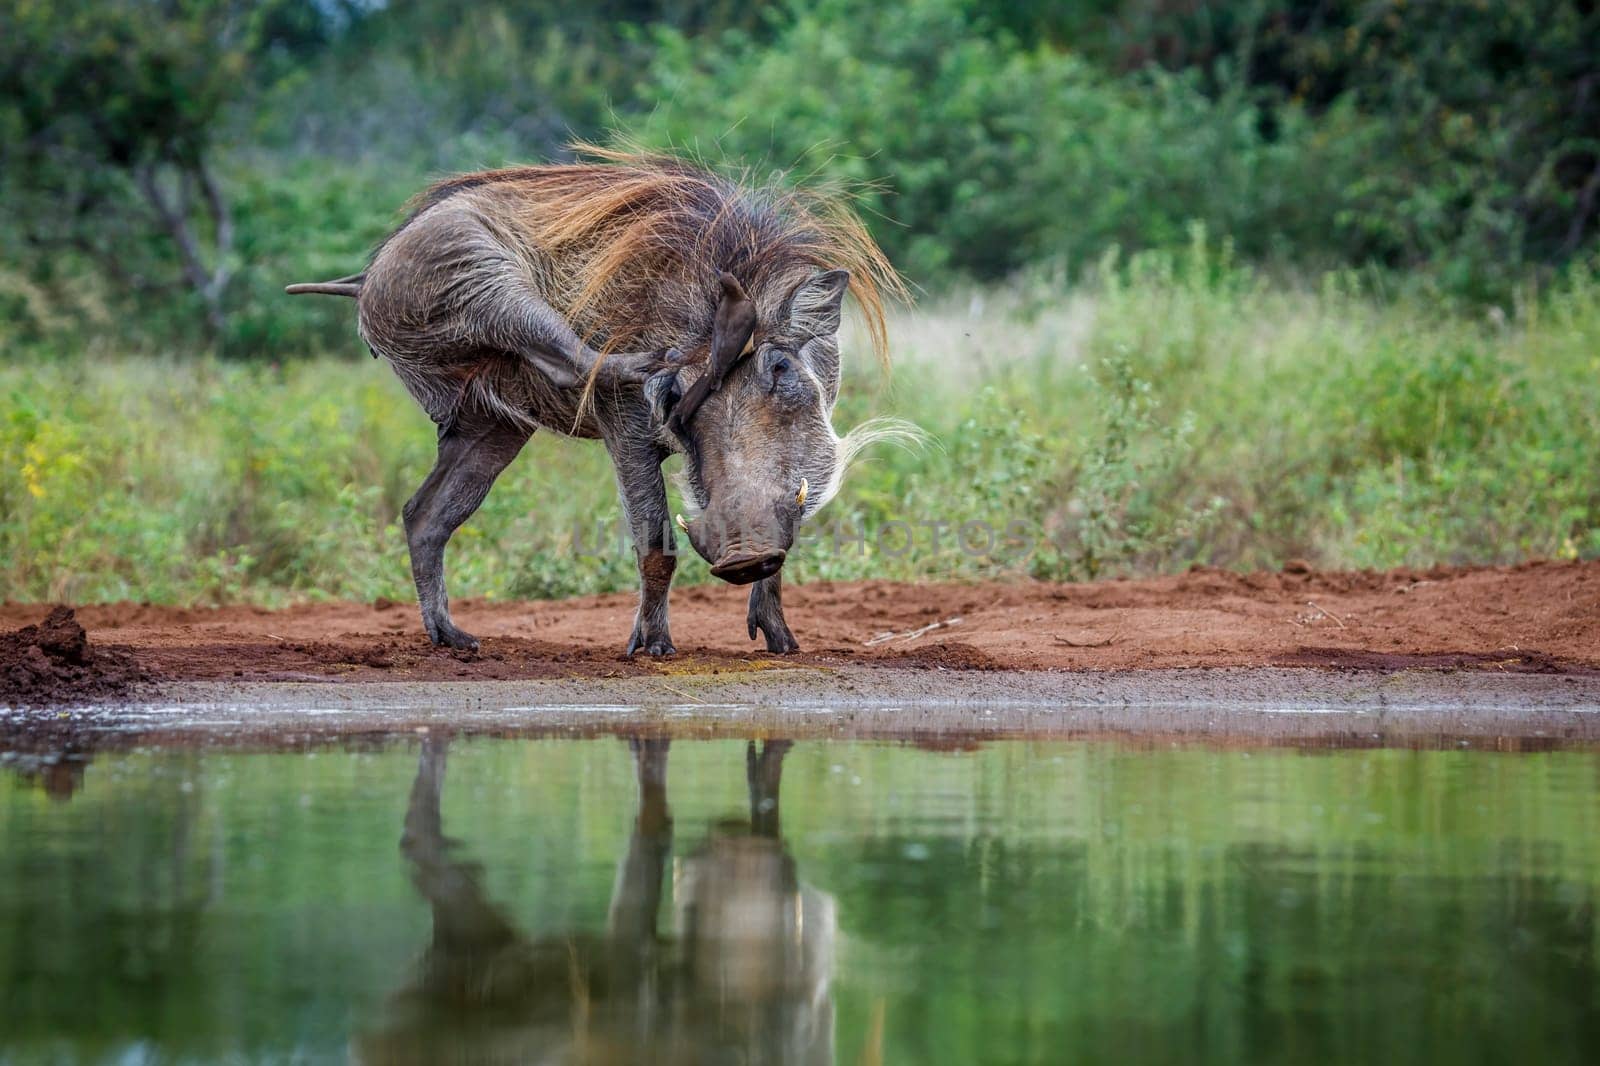 Common warthog grooming with oxpecker on head in Kruger National park, South Africa ; Specie Phacochoerus africanus family of Suidae